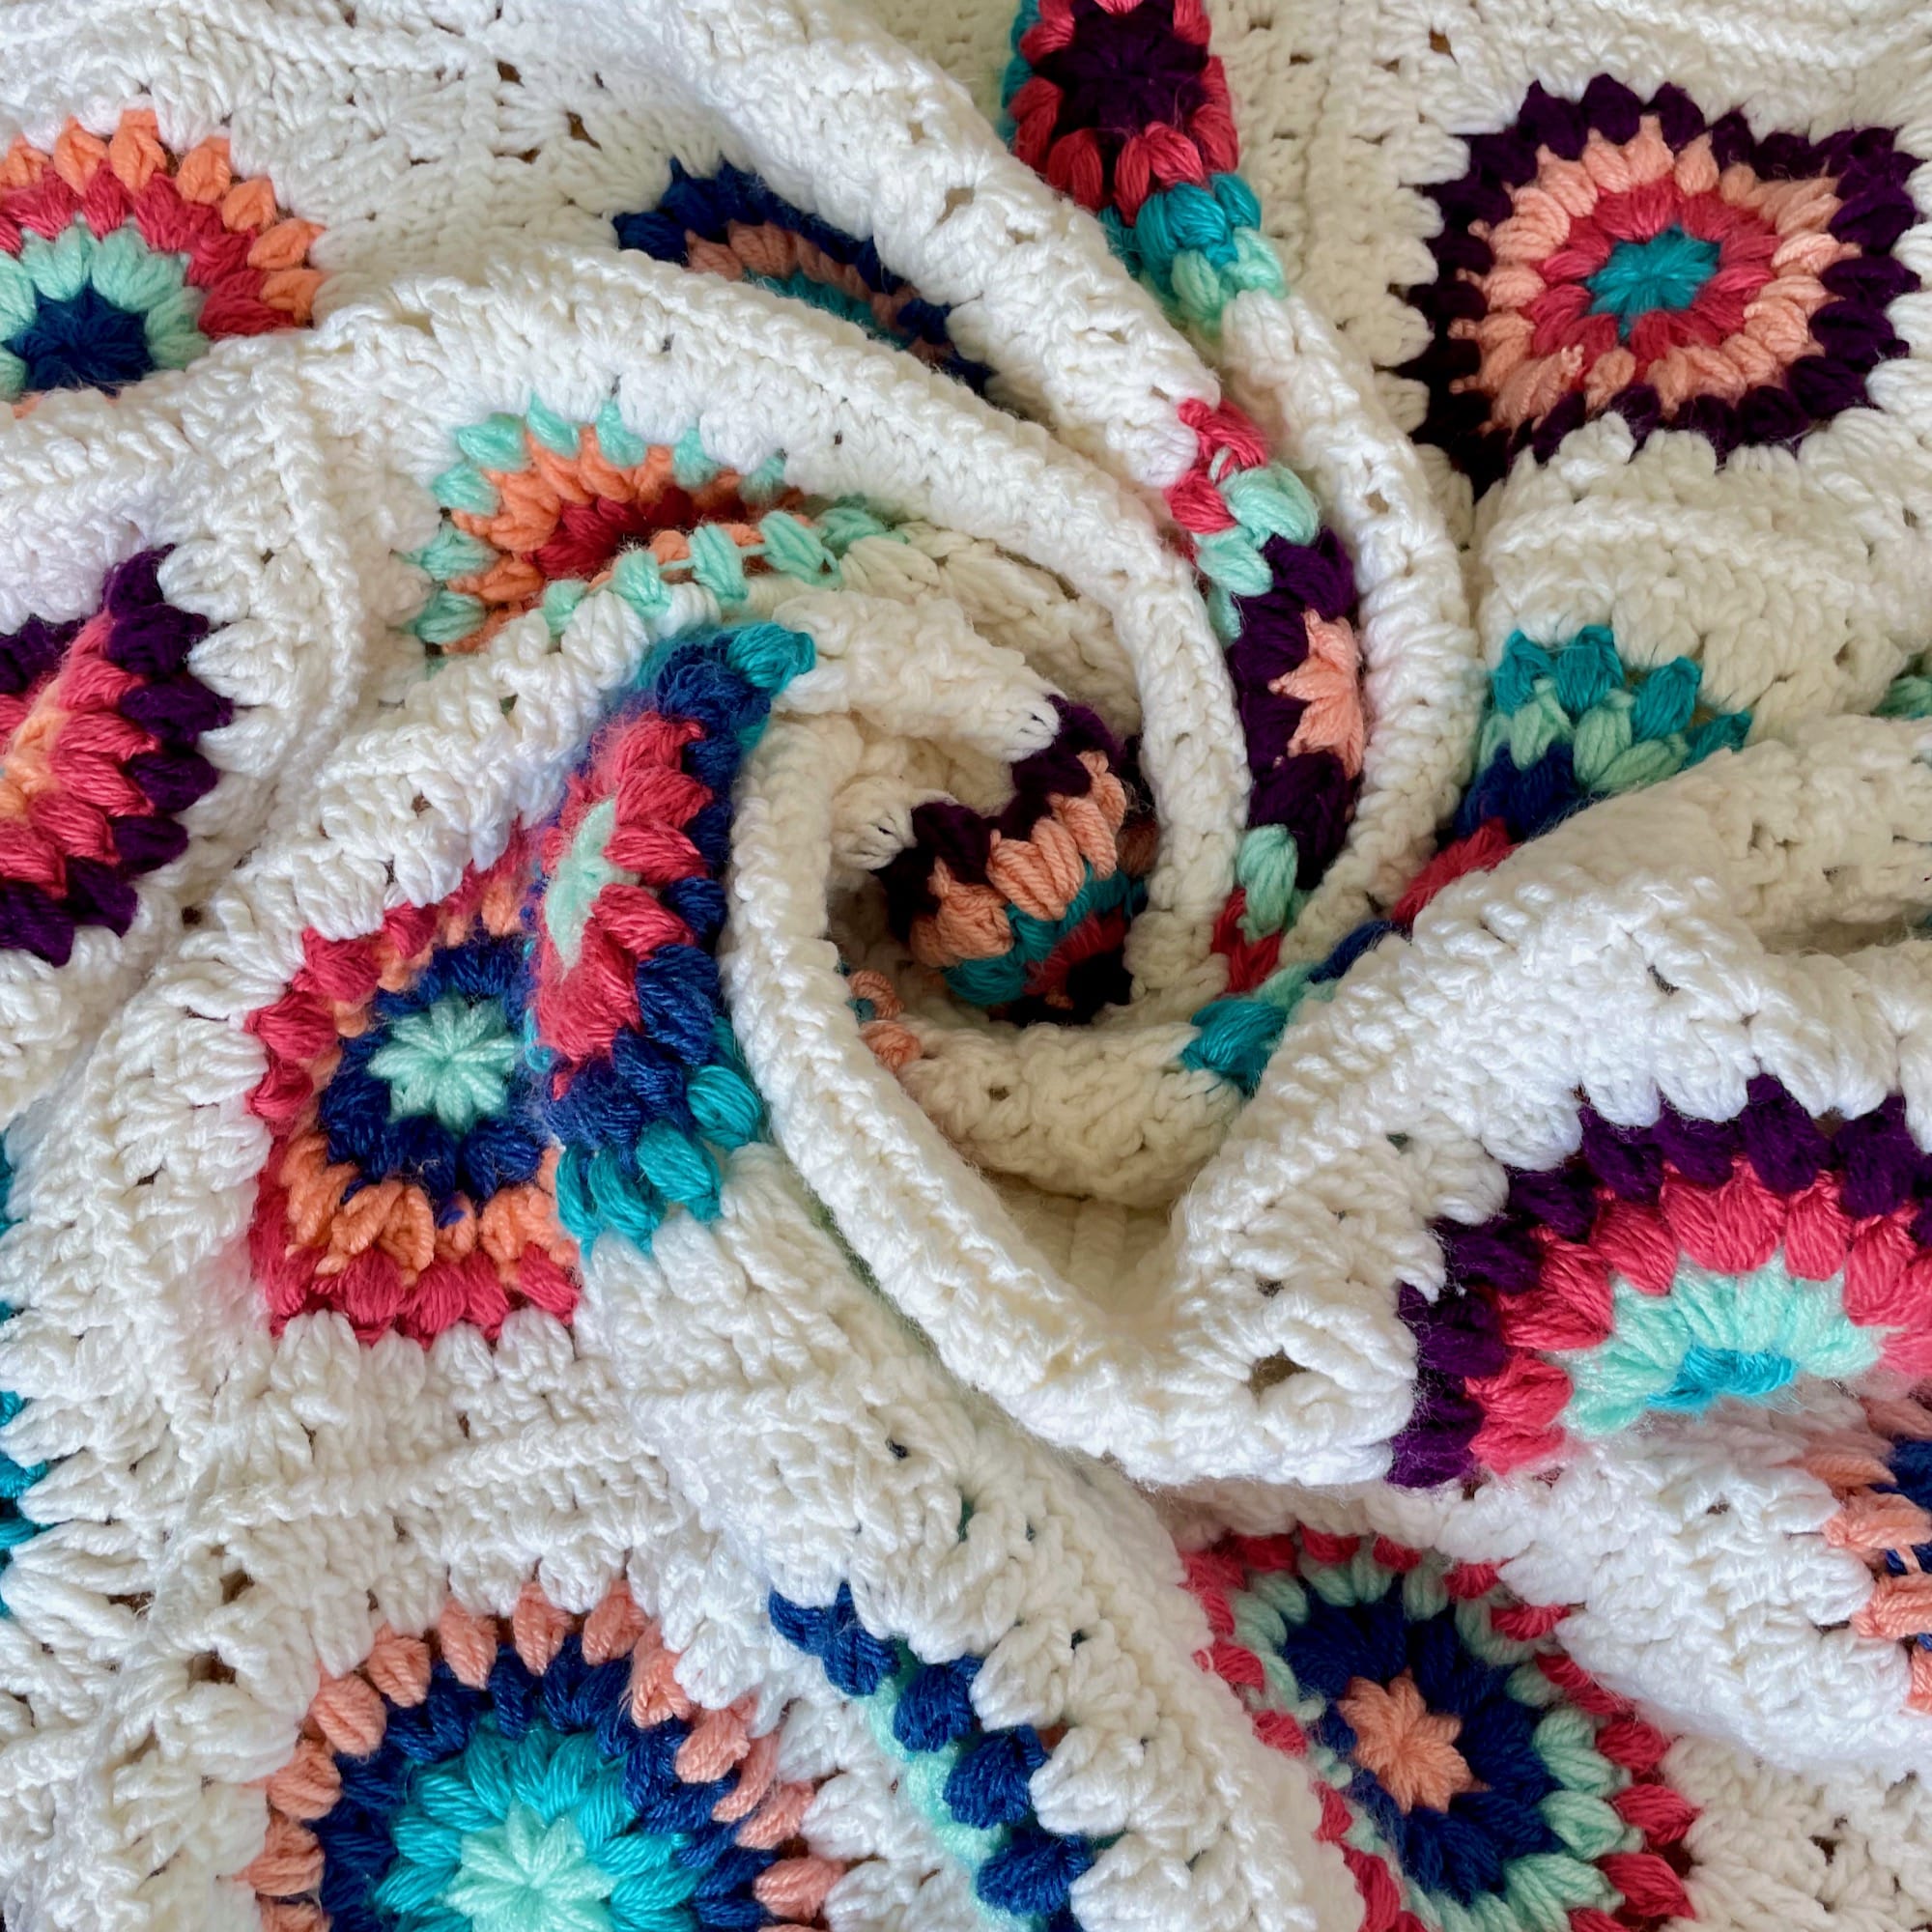 The Easy Peasy Blanket: How To Crochet A Snug Granny Square